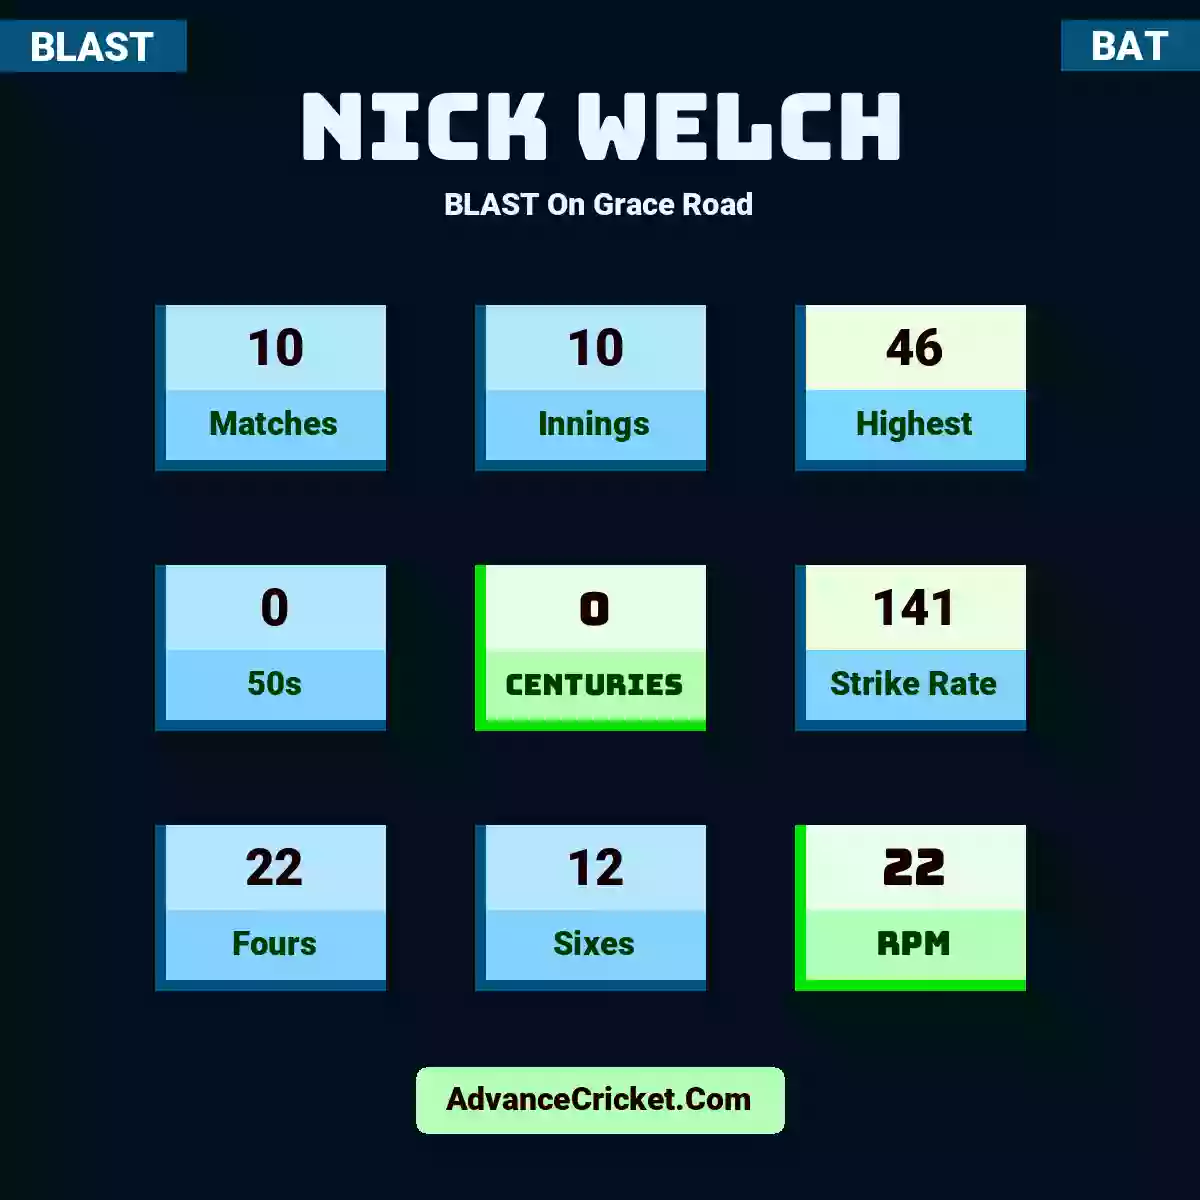 Nick Welch BLAST  On Grace Road, Nick Welch played 10 matches, scored 46 runs as highest, 0 half-centuries, and 0 centuries, with a strike rate of 141. N.Welch hit 22 fours and 12 sixes, with an RPM of 22.